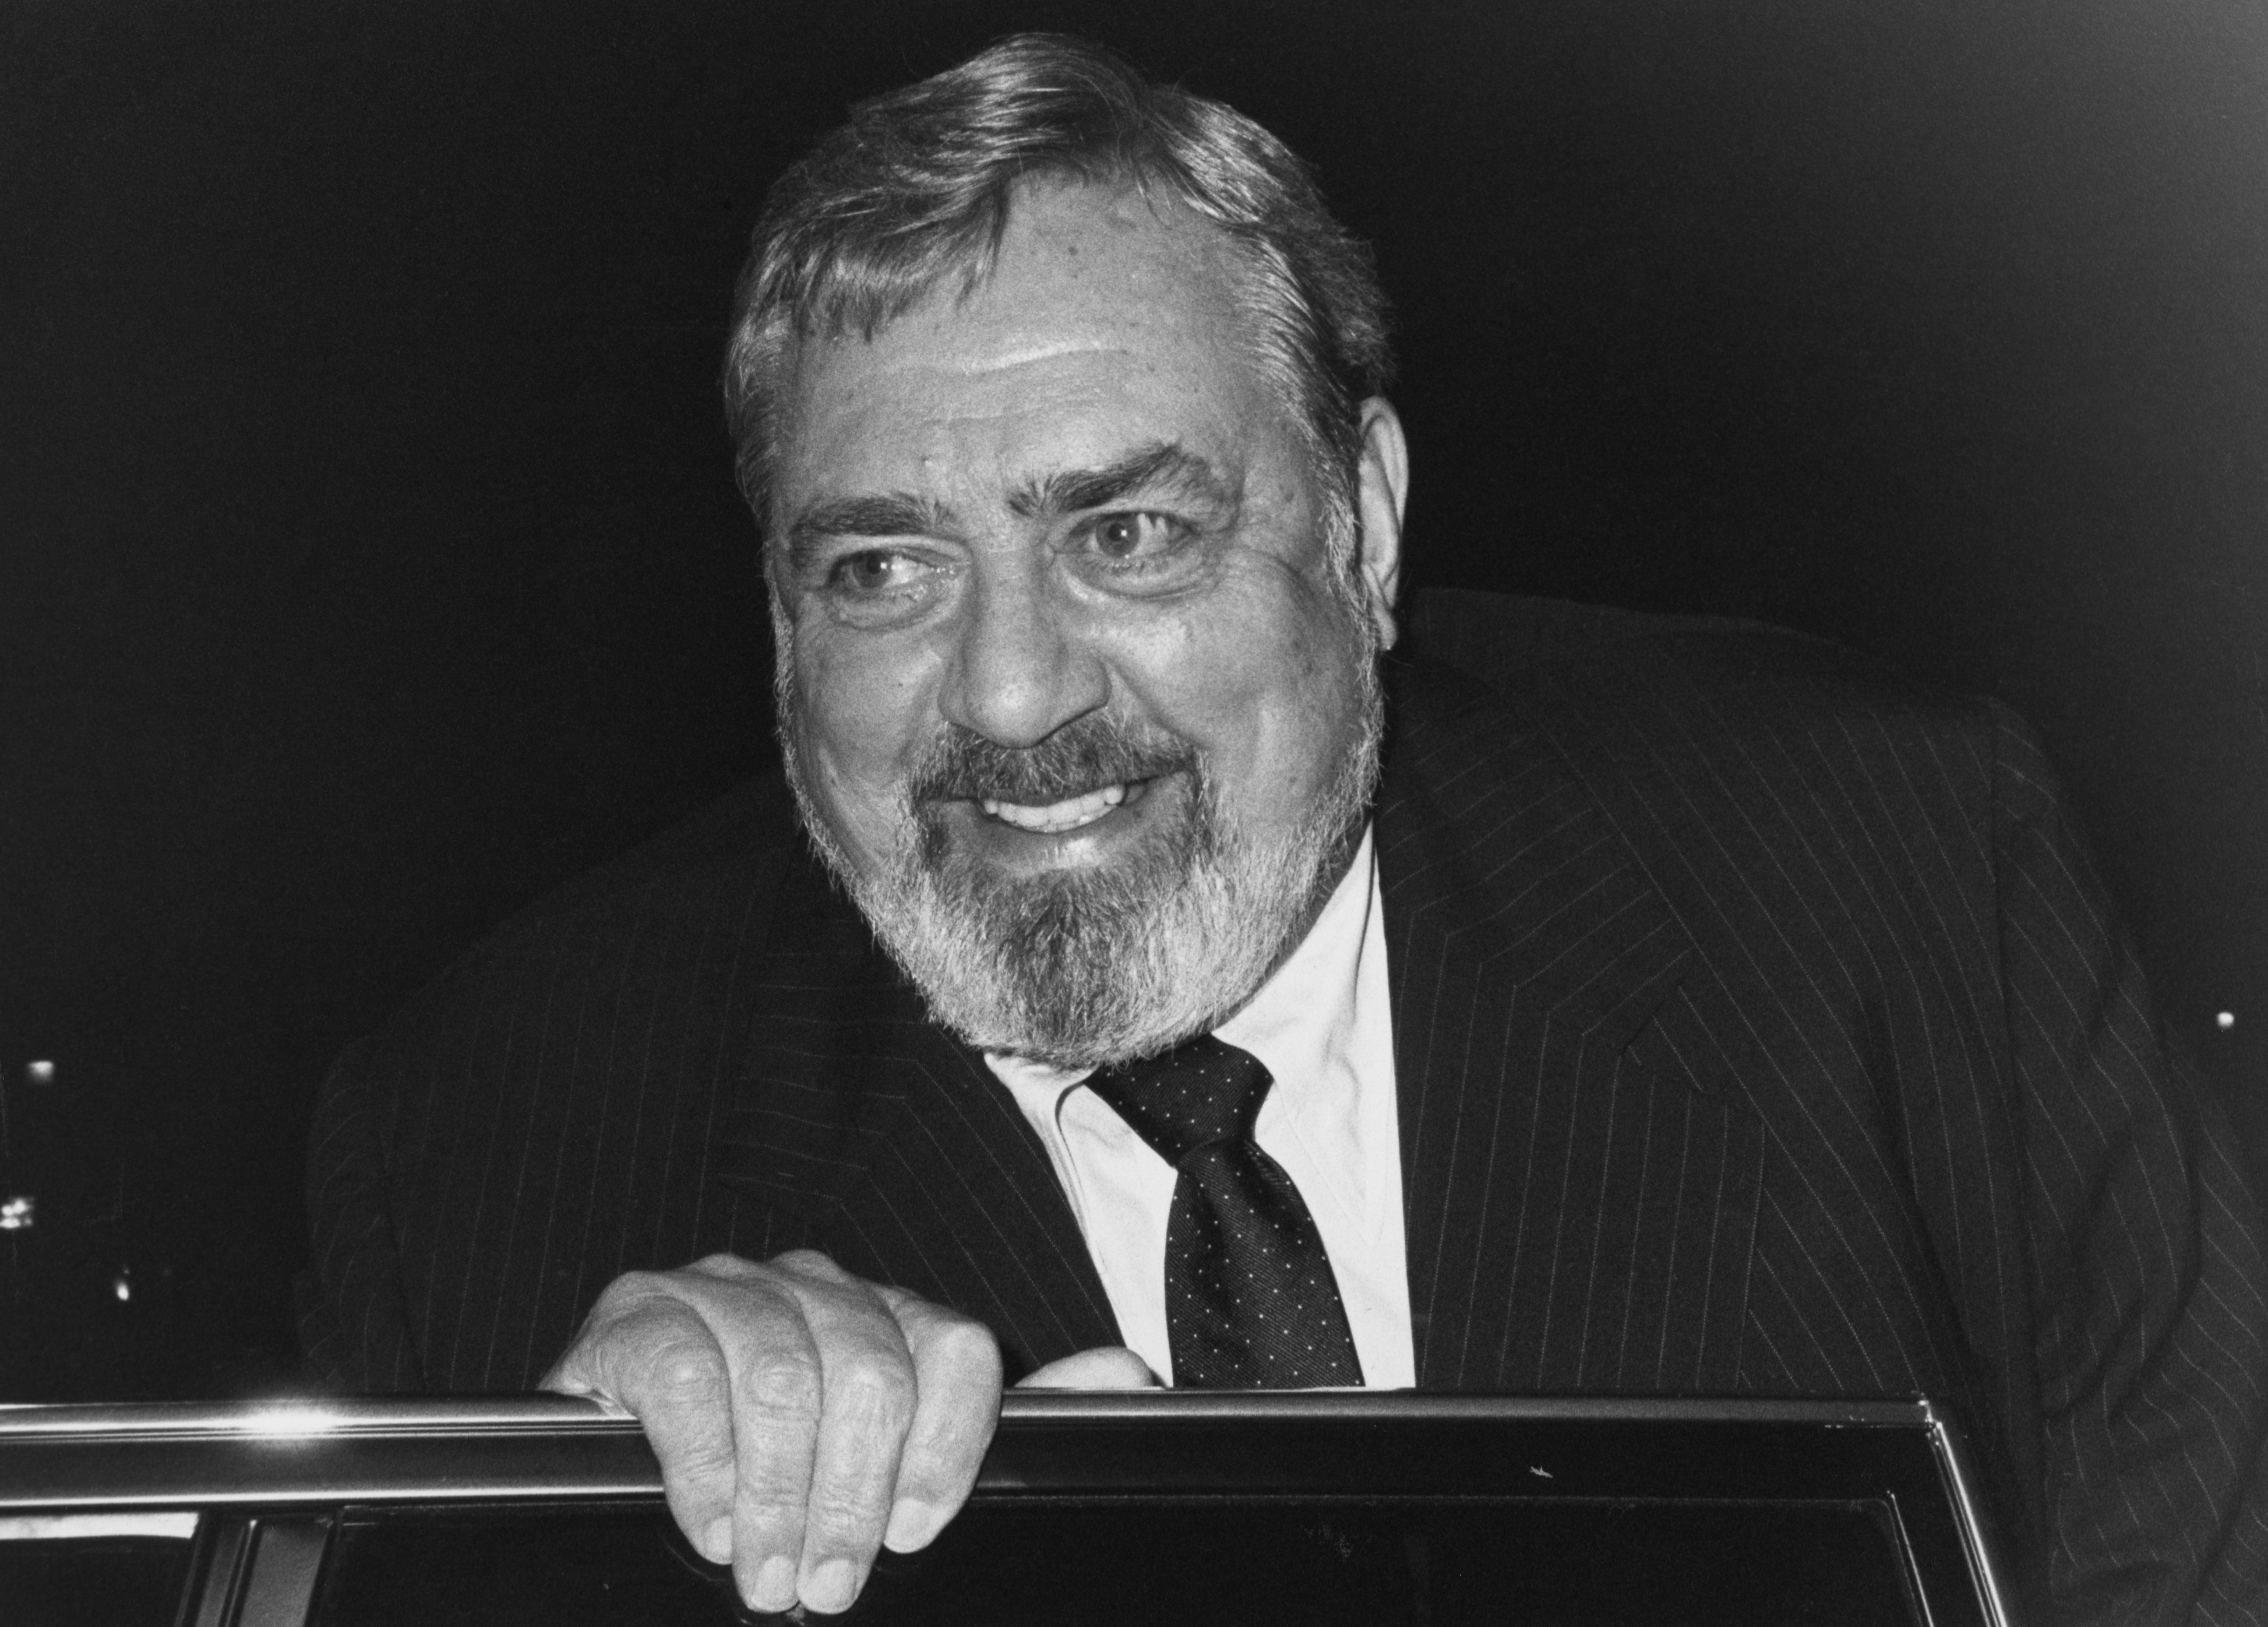 Raymond Burr photographed smiling with his hand on a car door in 1985 Los Angeles, California. / Source: Getty Images